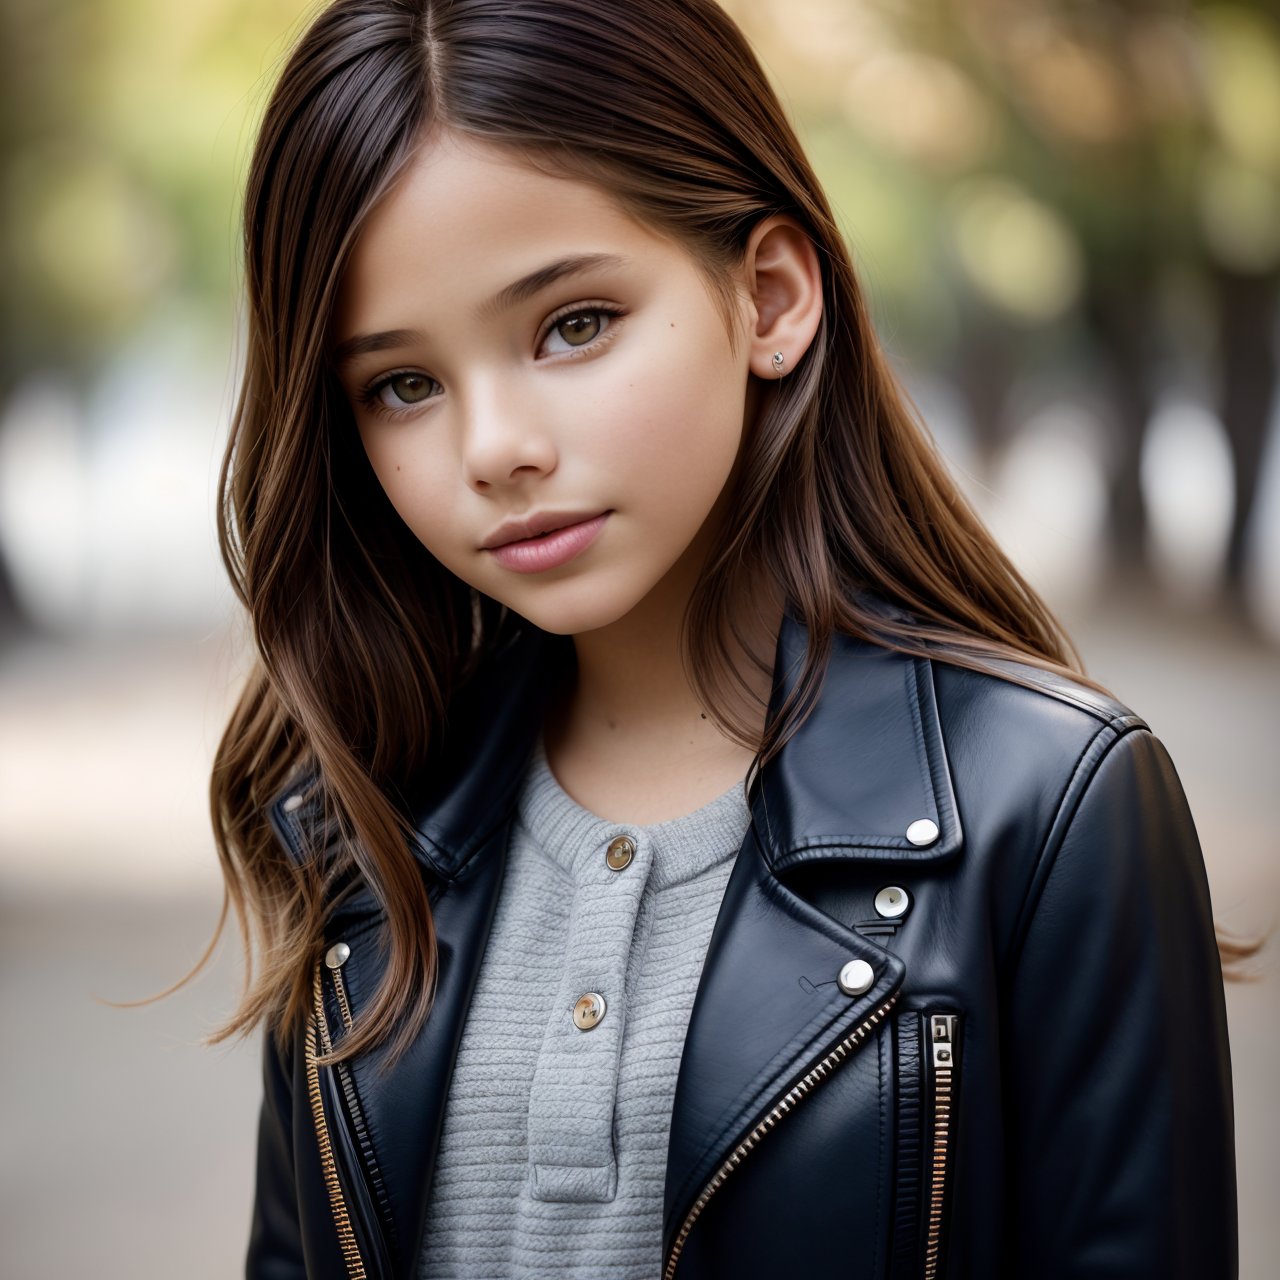 best quality, view from above, close up portrait of charming (AIDA_LoRA_LG2014:1.1) <lora:AIDA_LoRA_LG2014:0.71> as little girl in a leather jacket posing in the park, outdoors, pretty face, flirting, cinematic, insane level of details, intricate pattern, studio photo, studio photo, kkw-ph1, hdr, f1.7, getty images, (colorful:1.1)